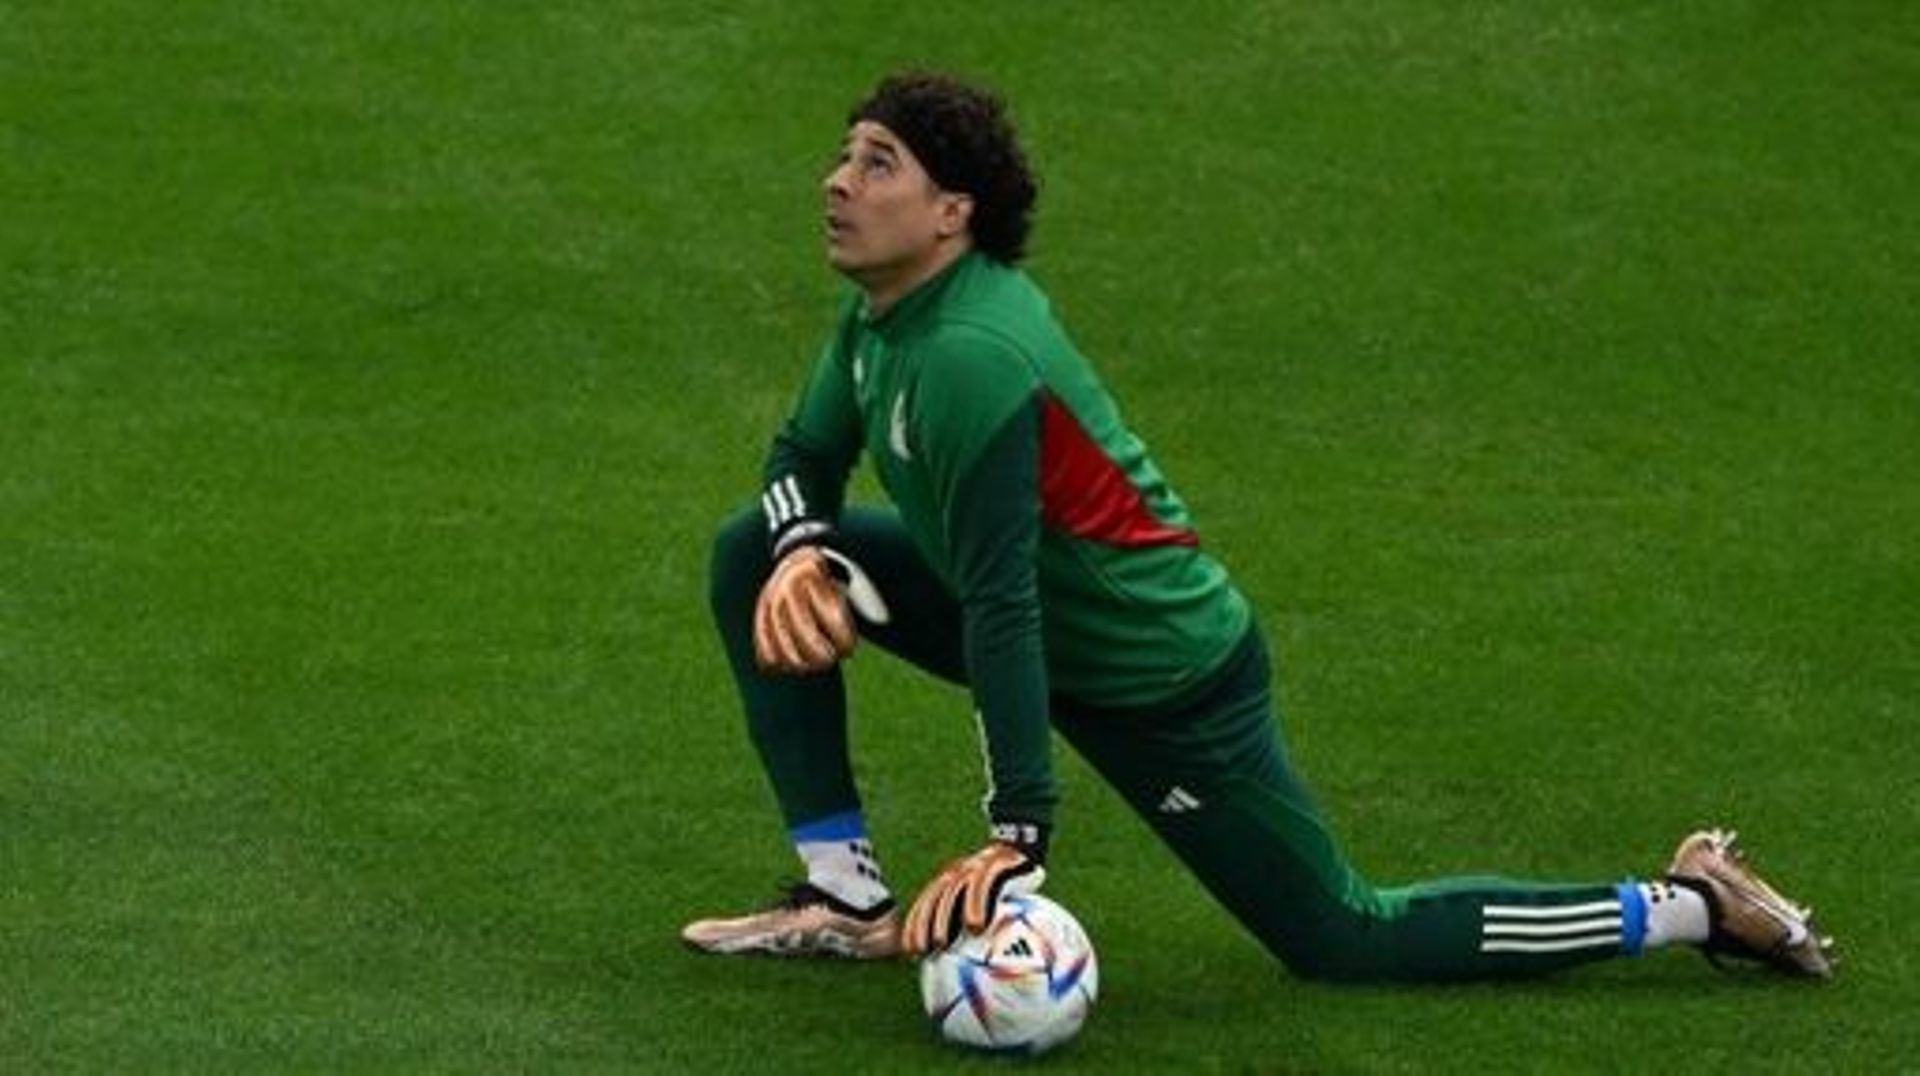 Mexico's goalkeeper #13 Guillermo Ochoa warms up ahead of the Qatar 2022 World Cup Group C football match between Saudi Arabia and Mexico at the Lusail Stadium in Lusail, north of Doha on November 30, 2022.  Pablo PORCIUNCULA / AFP